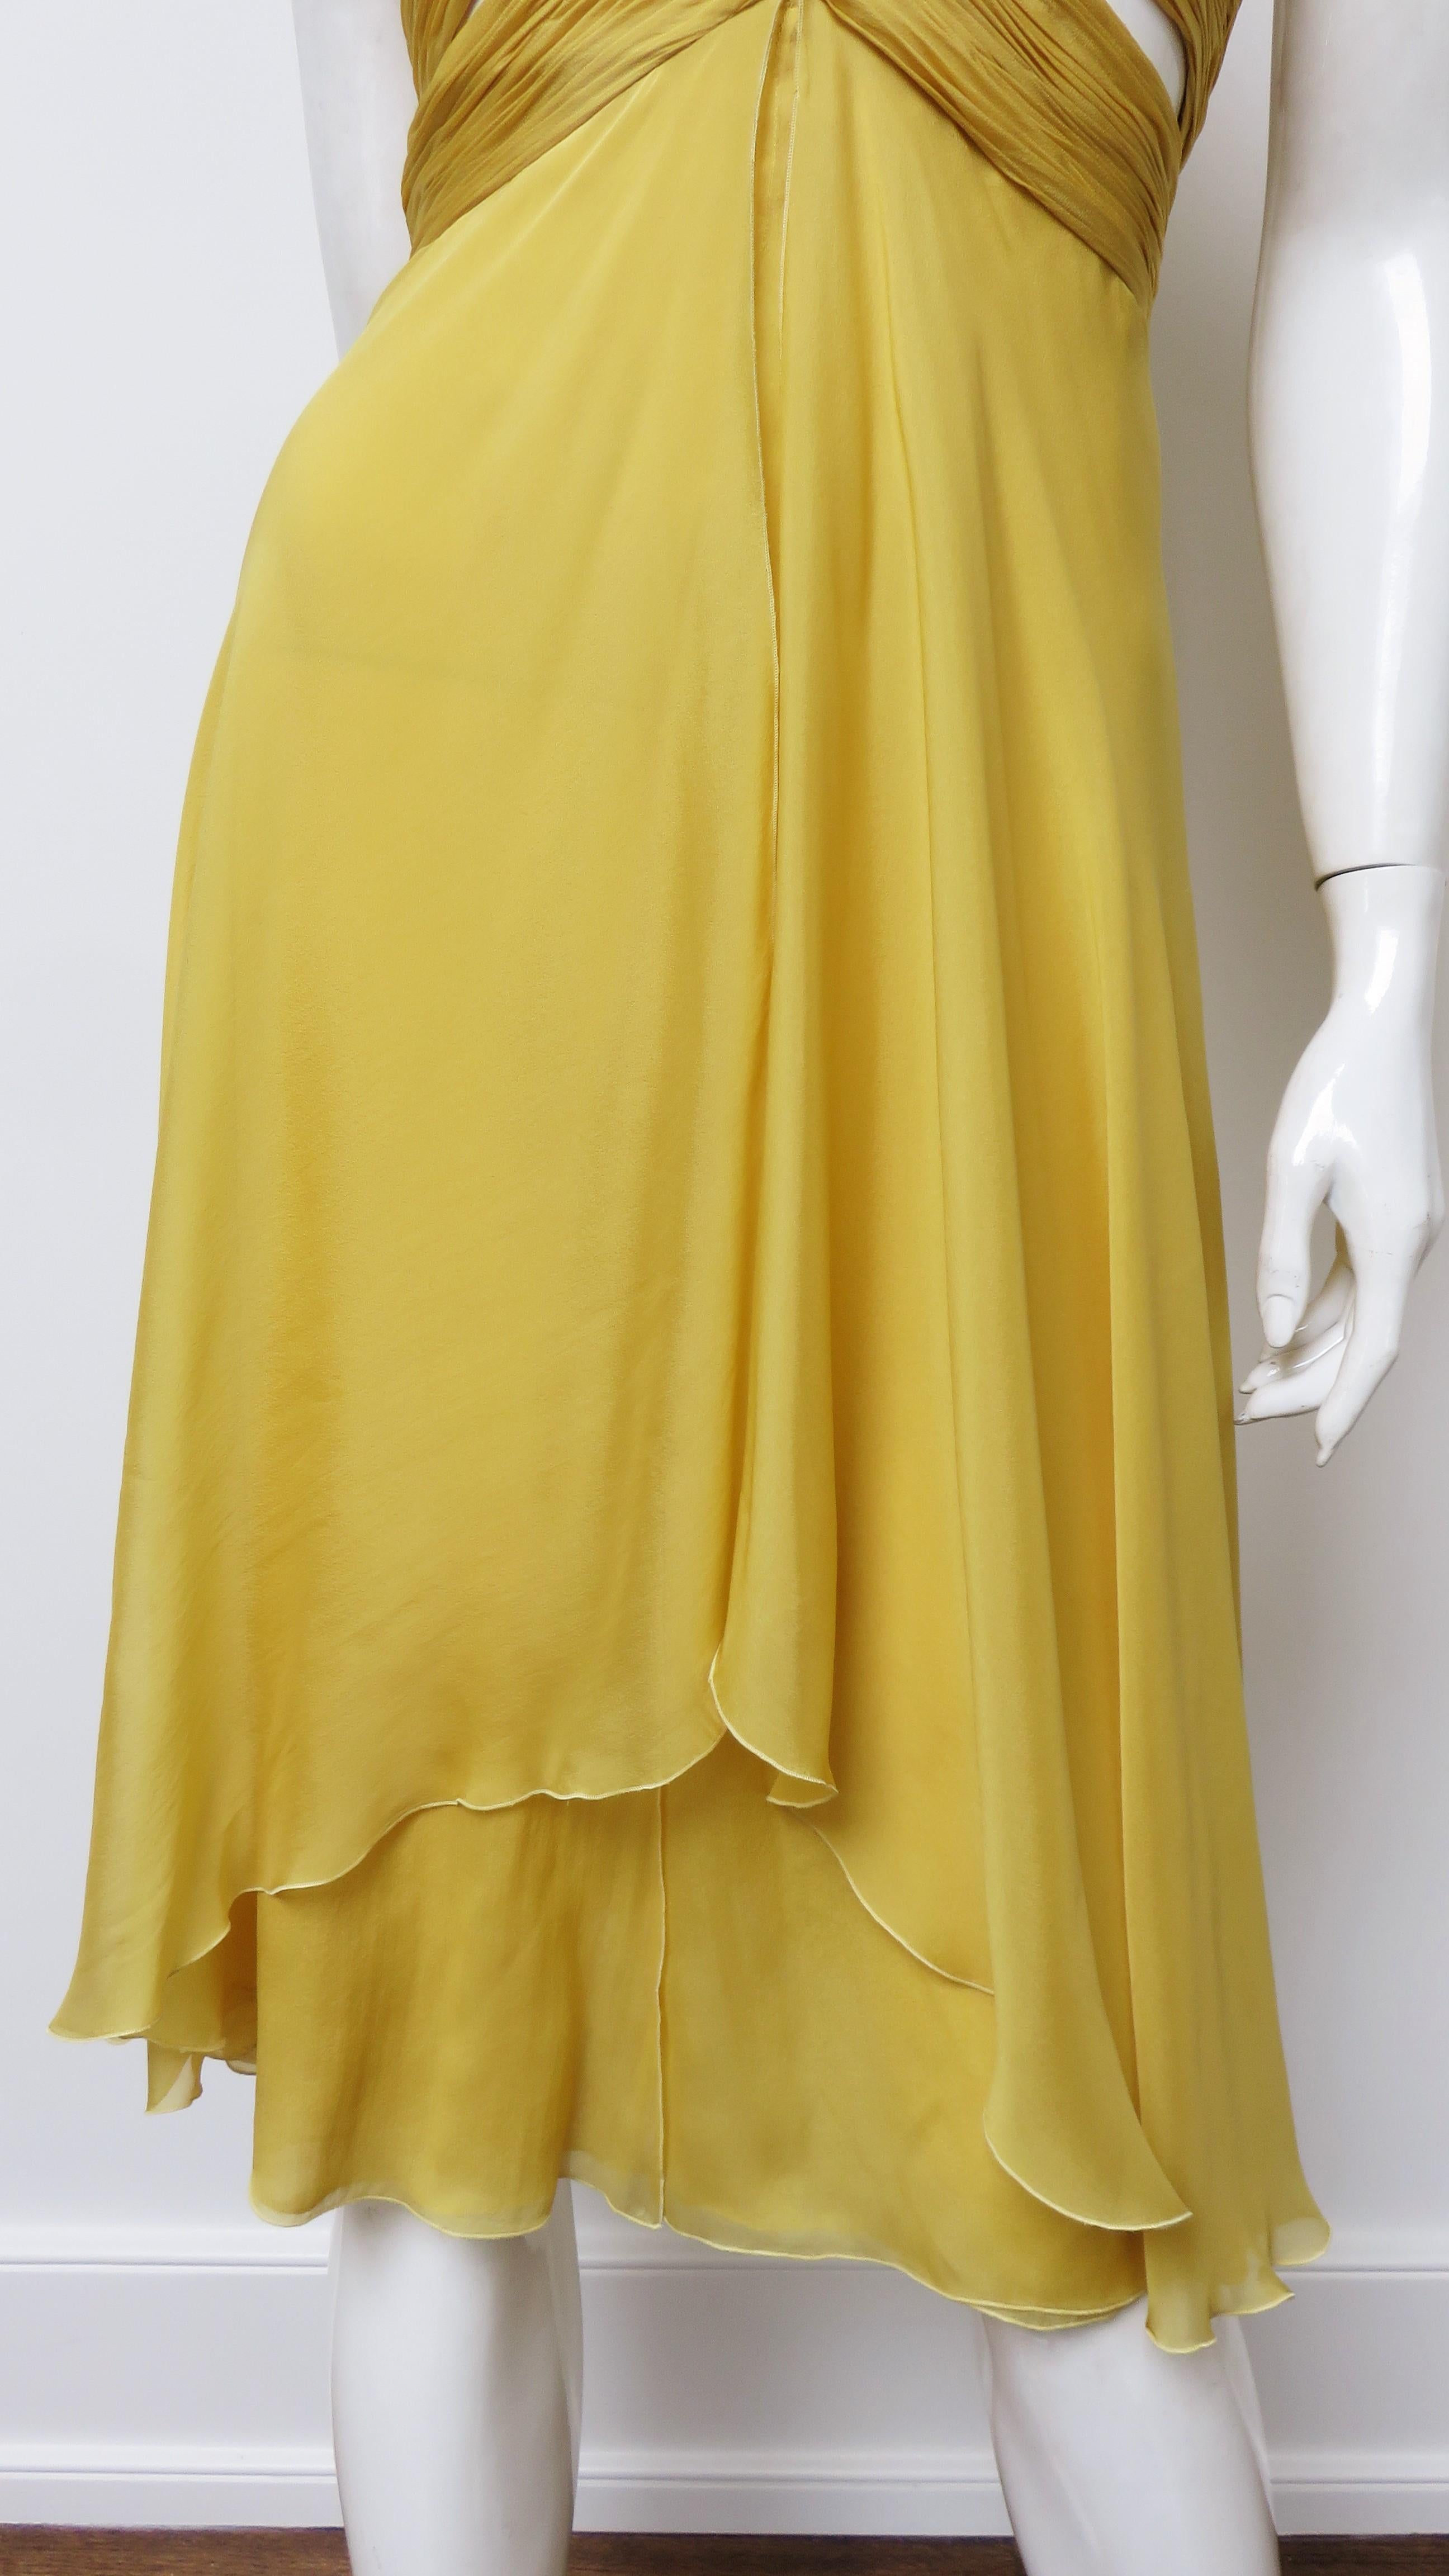 Valentino Silk Dress with Cut outs In Excellent Condition For Sale In Water Mill, NY